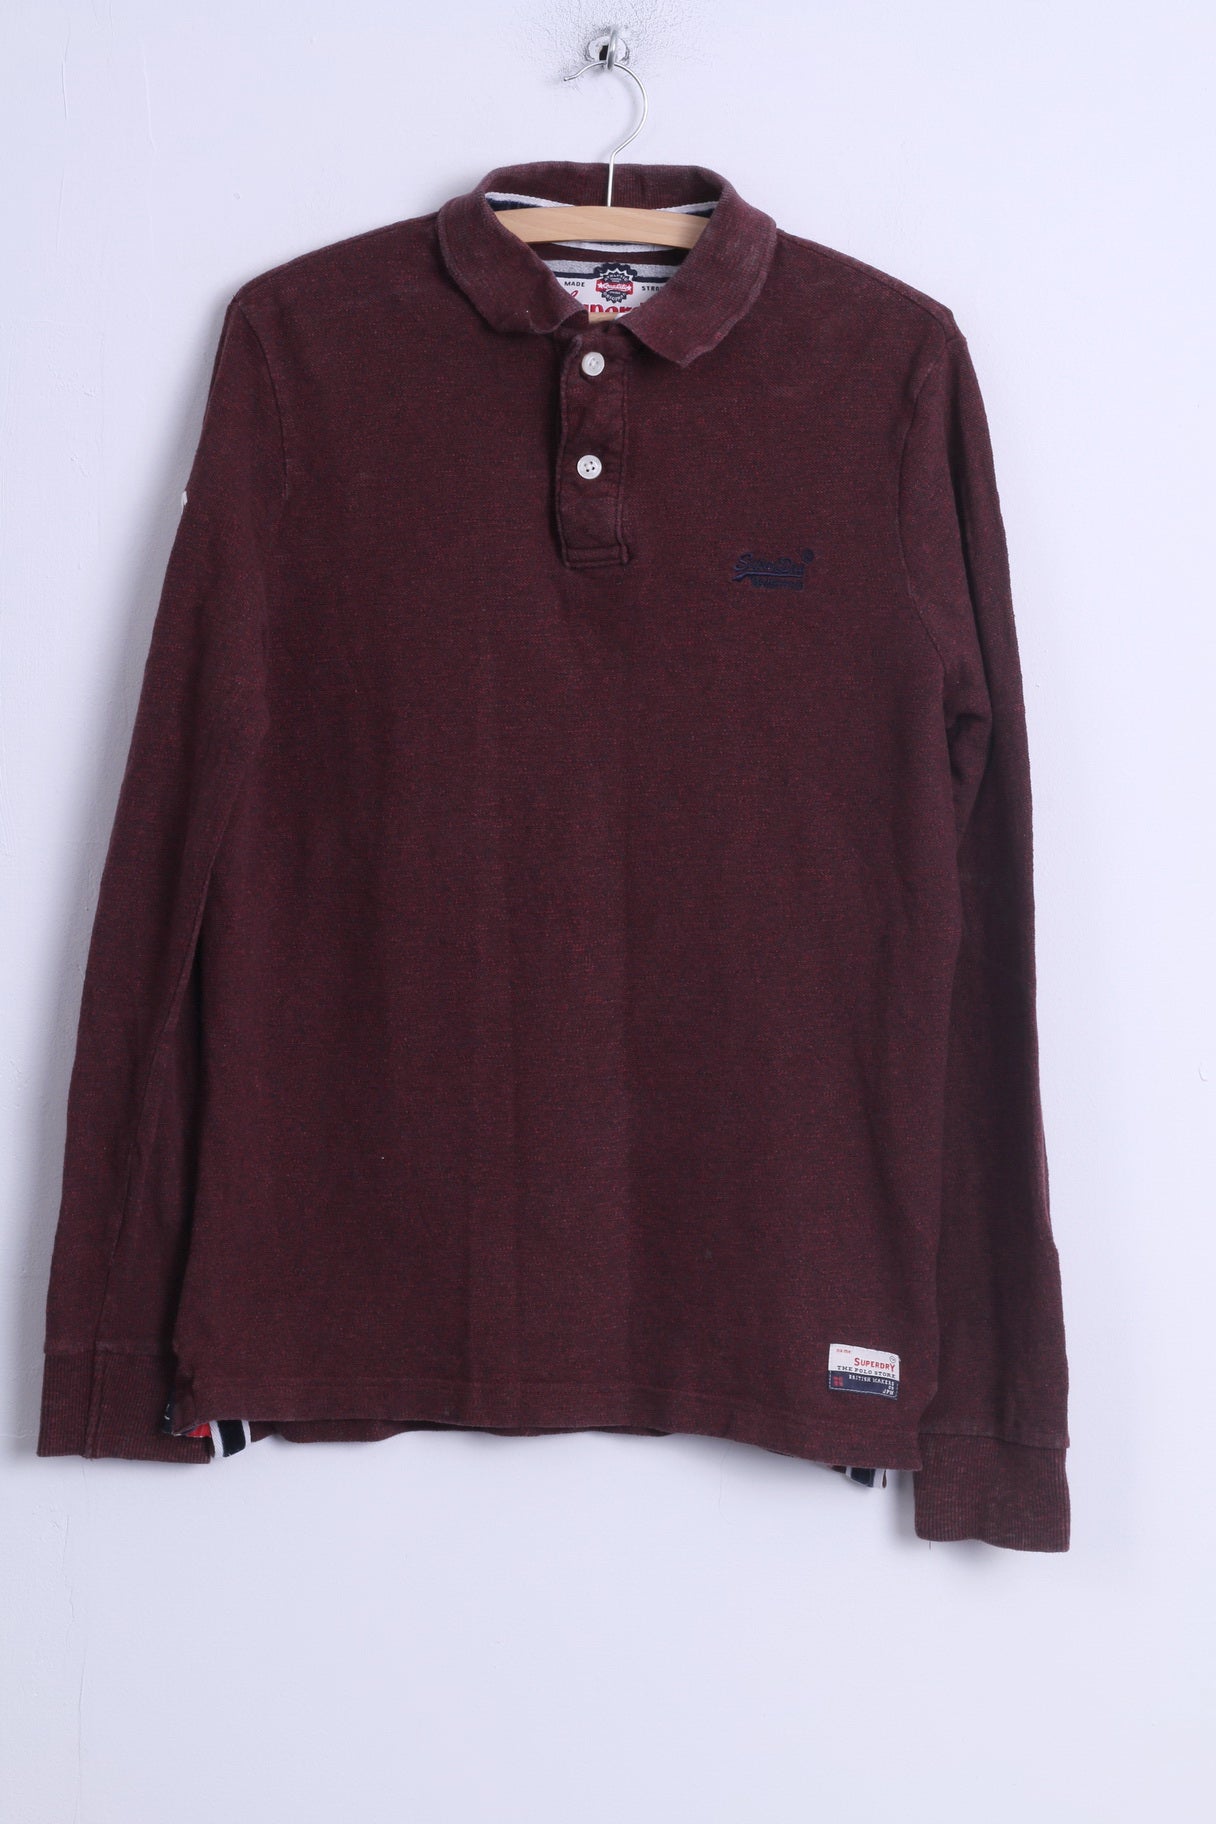 Superdry Mens XL (M) Polo Shirt Burgundy Cotton Long Sleeve Detailed Buttons Japan